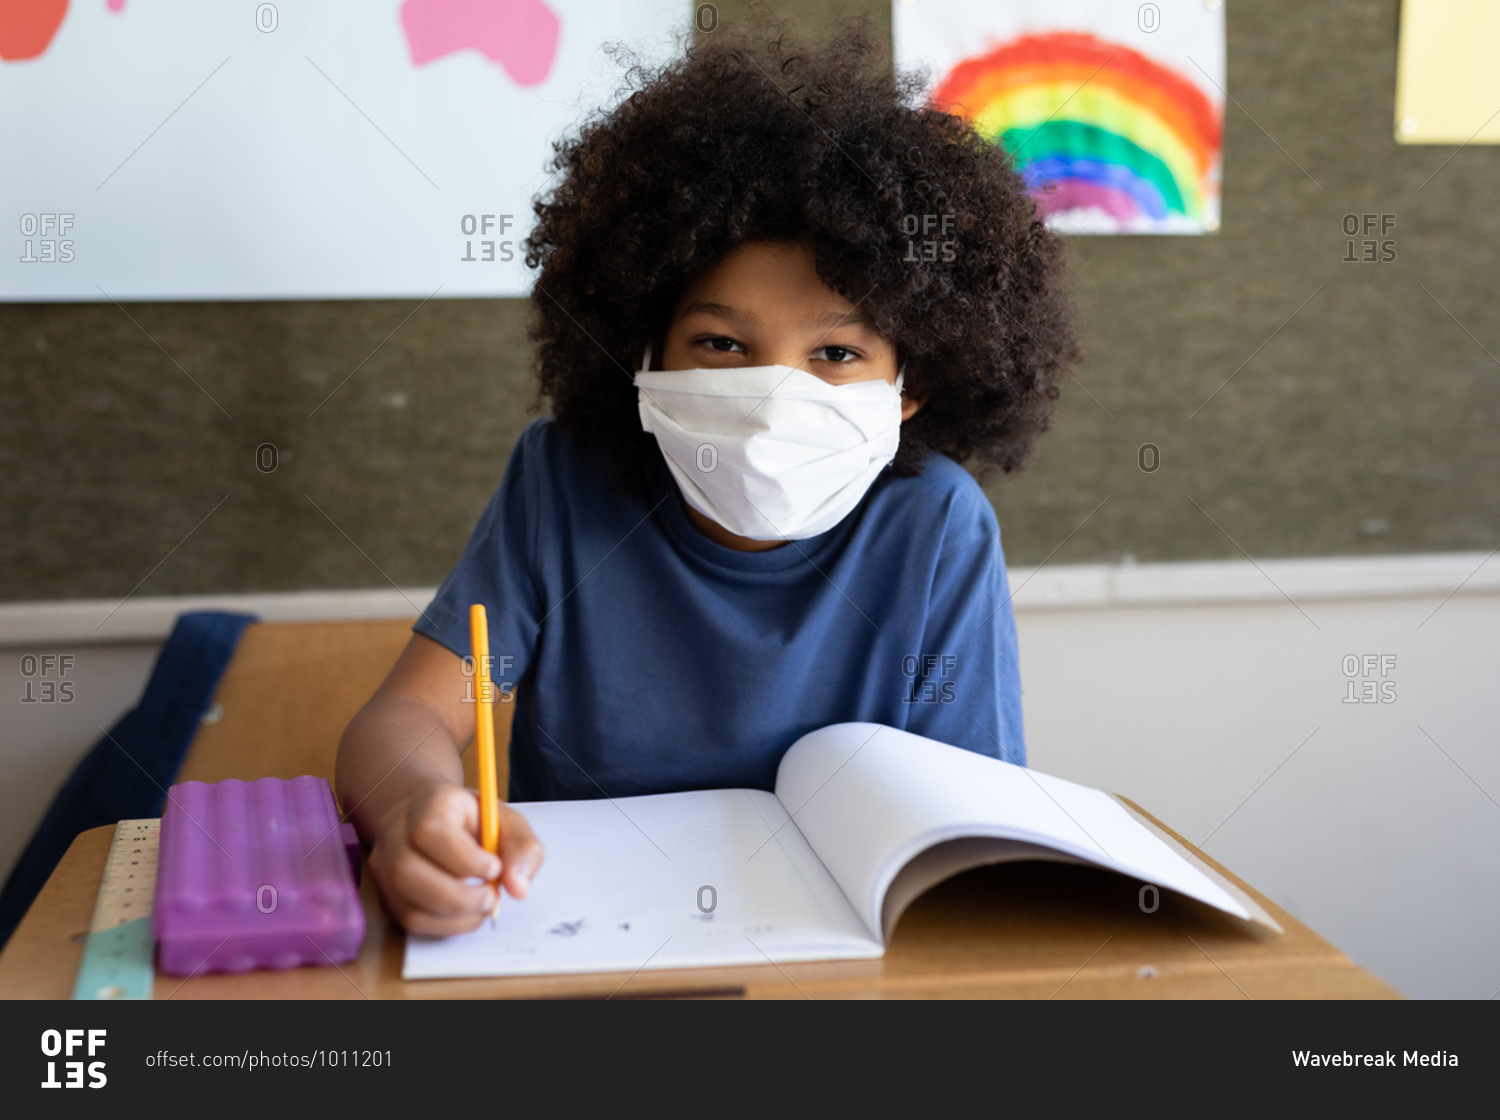 Portrait of a mixed race boy sitting at desk wearing face mask in classroom. Primary education social distancing health safety during Covid19 Coronavirus pandemic.